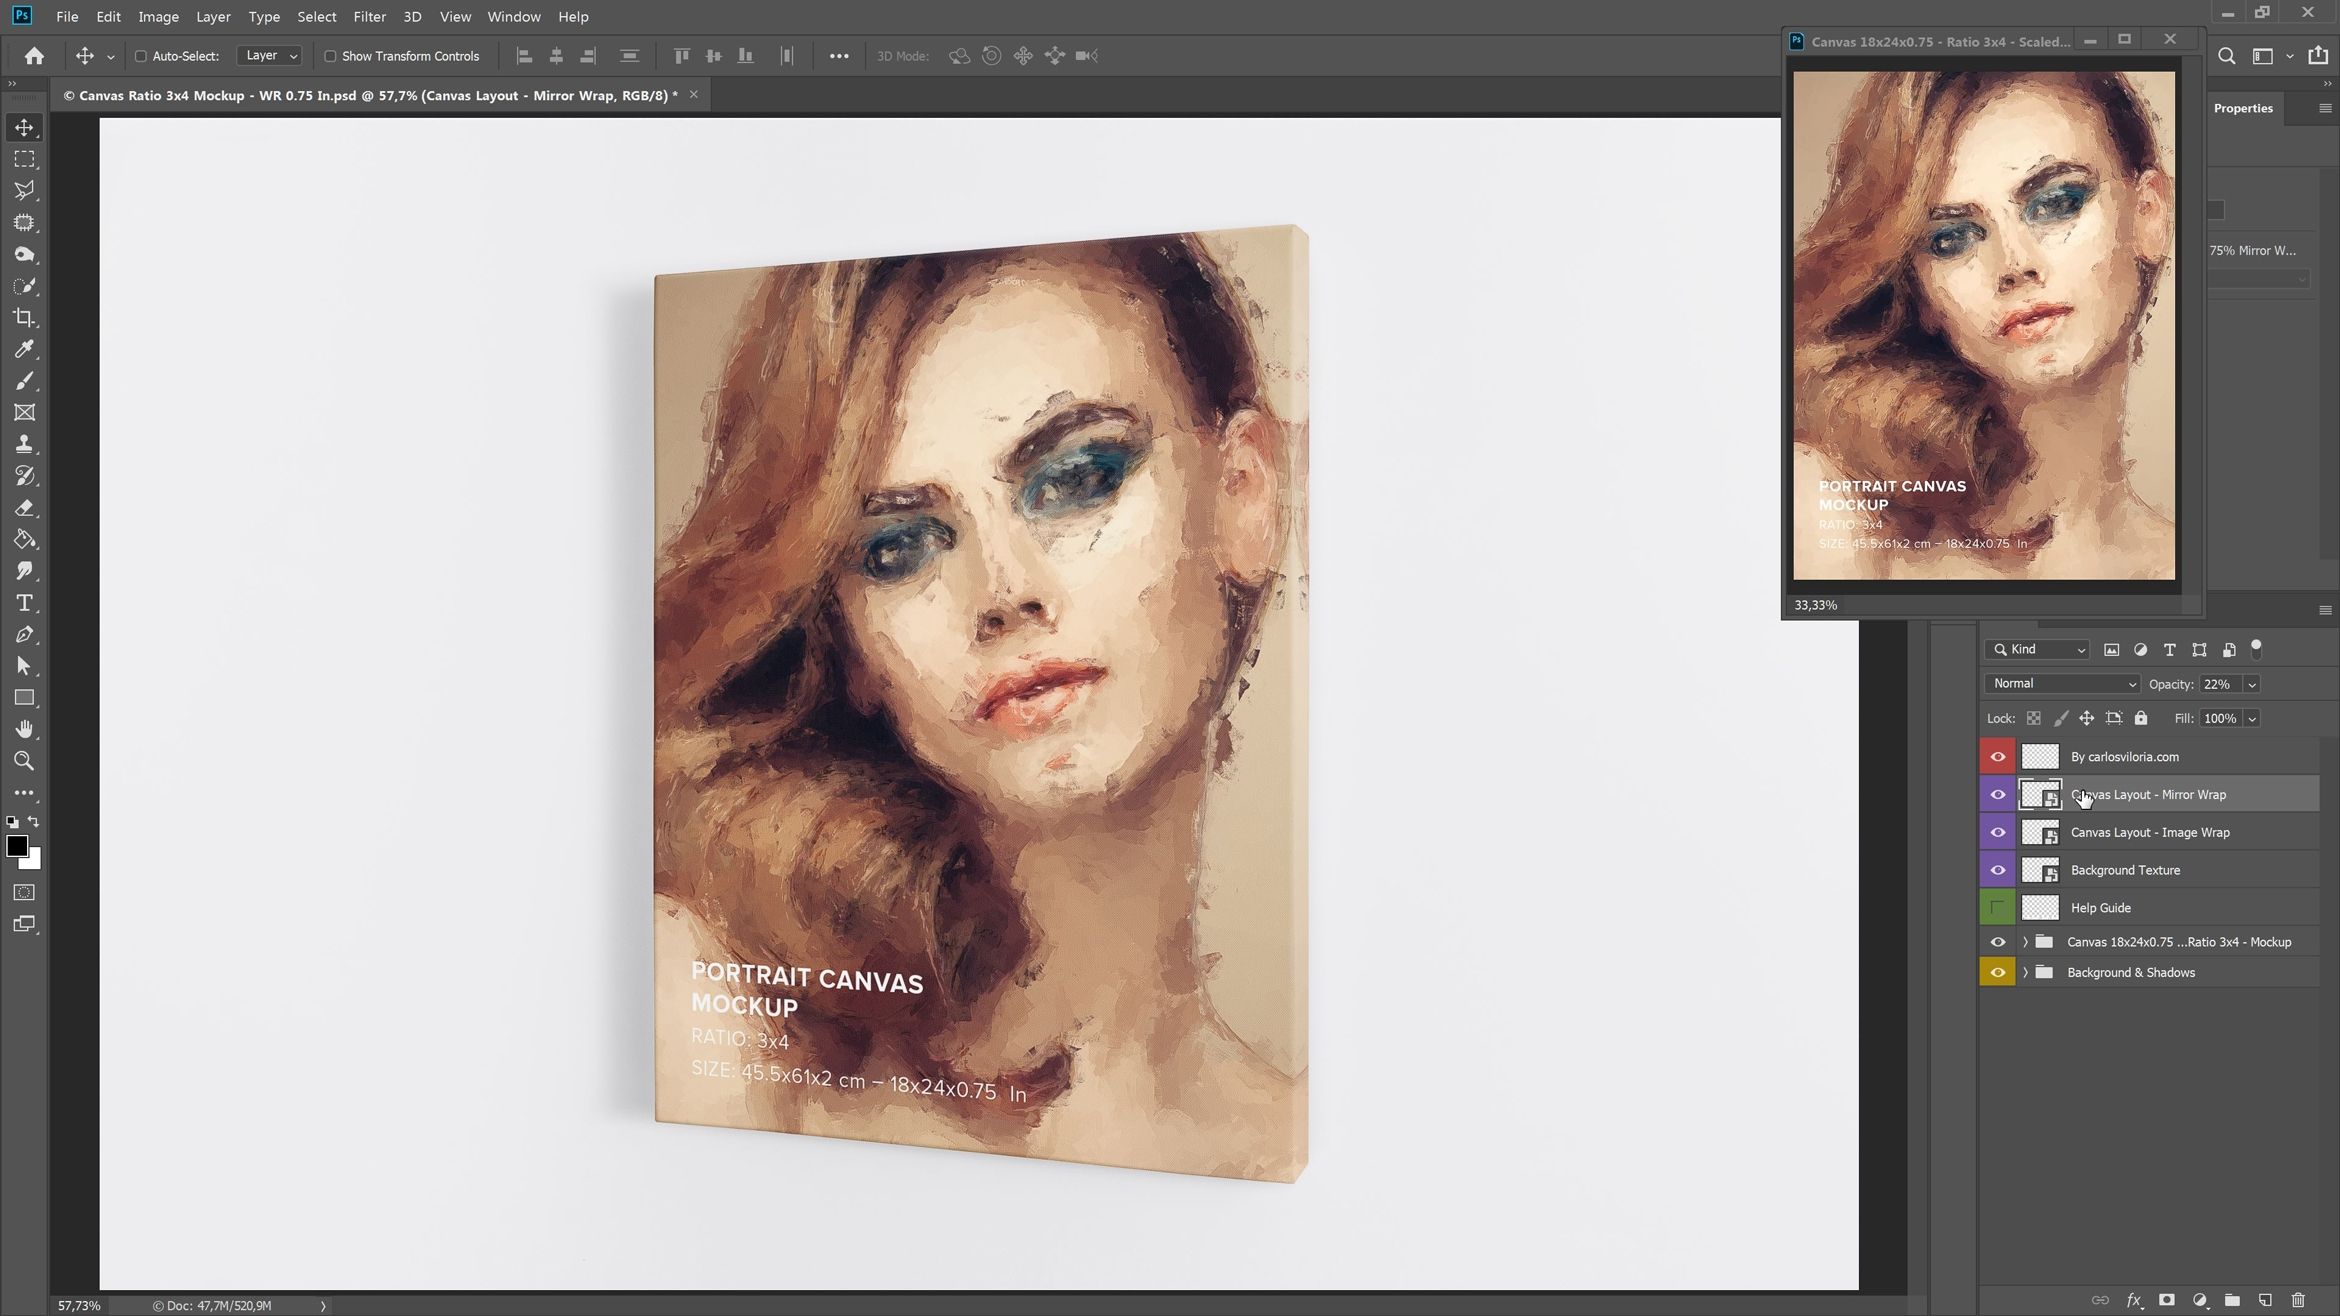 Hanging Portrait Canvas Ratio 3x4 Mockup - Right 1.5 in Wrap